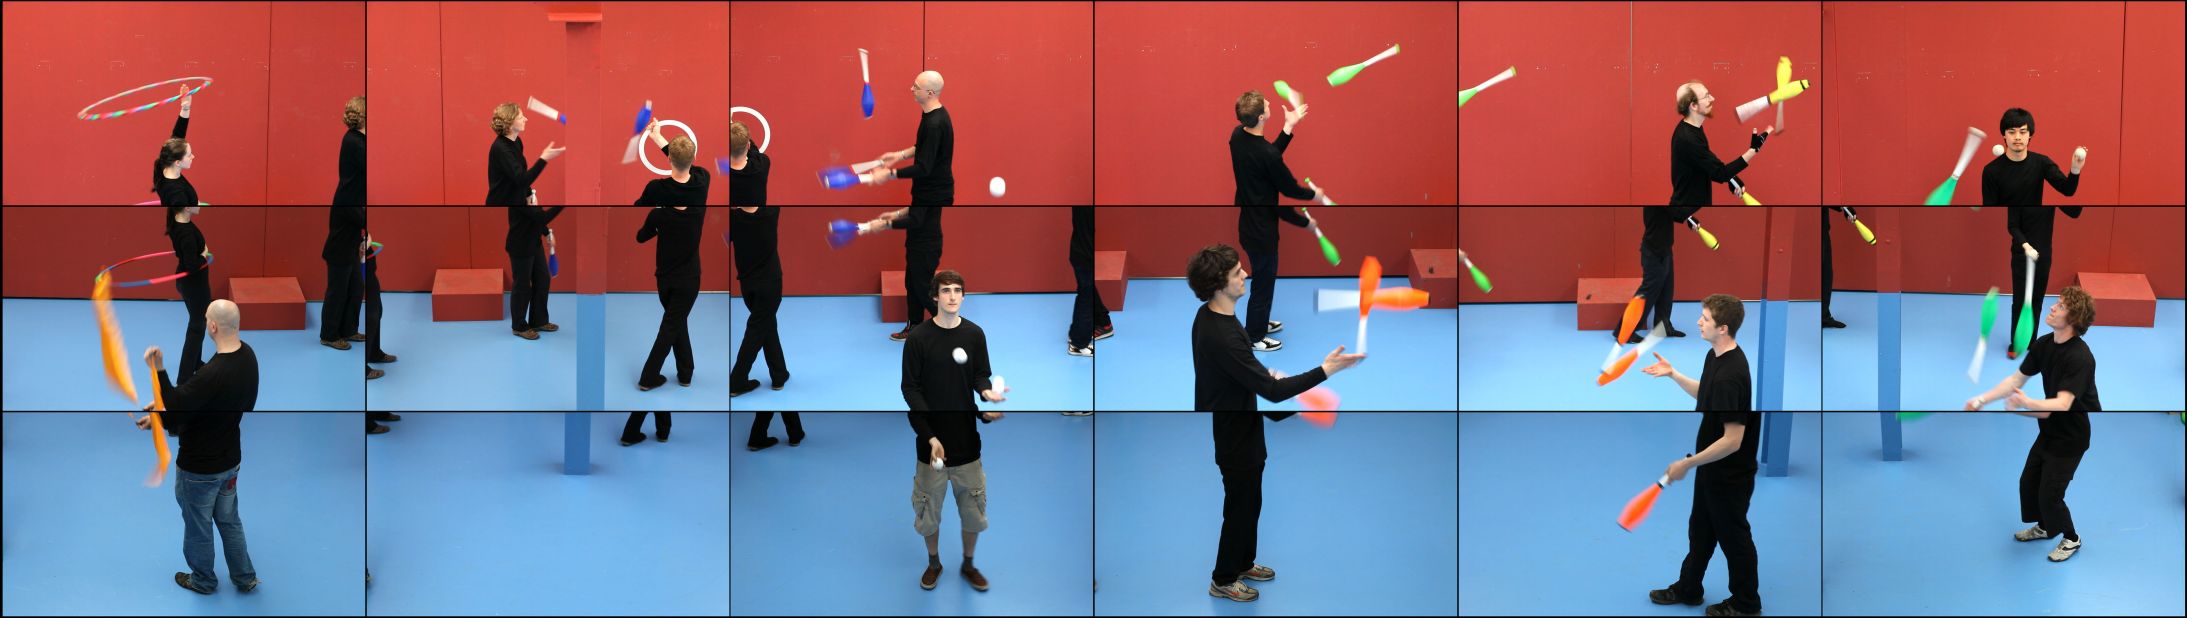 Detail of The Jugglers. The work was created using 18 digital video cameras, and is played back in the gallery on 18 different screens. The variations in perspective lend the work an almost cubist feel.